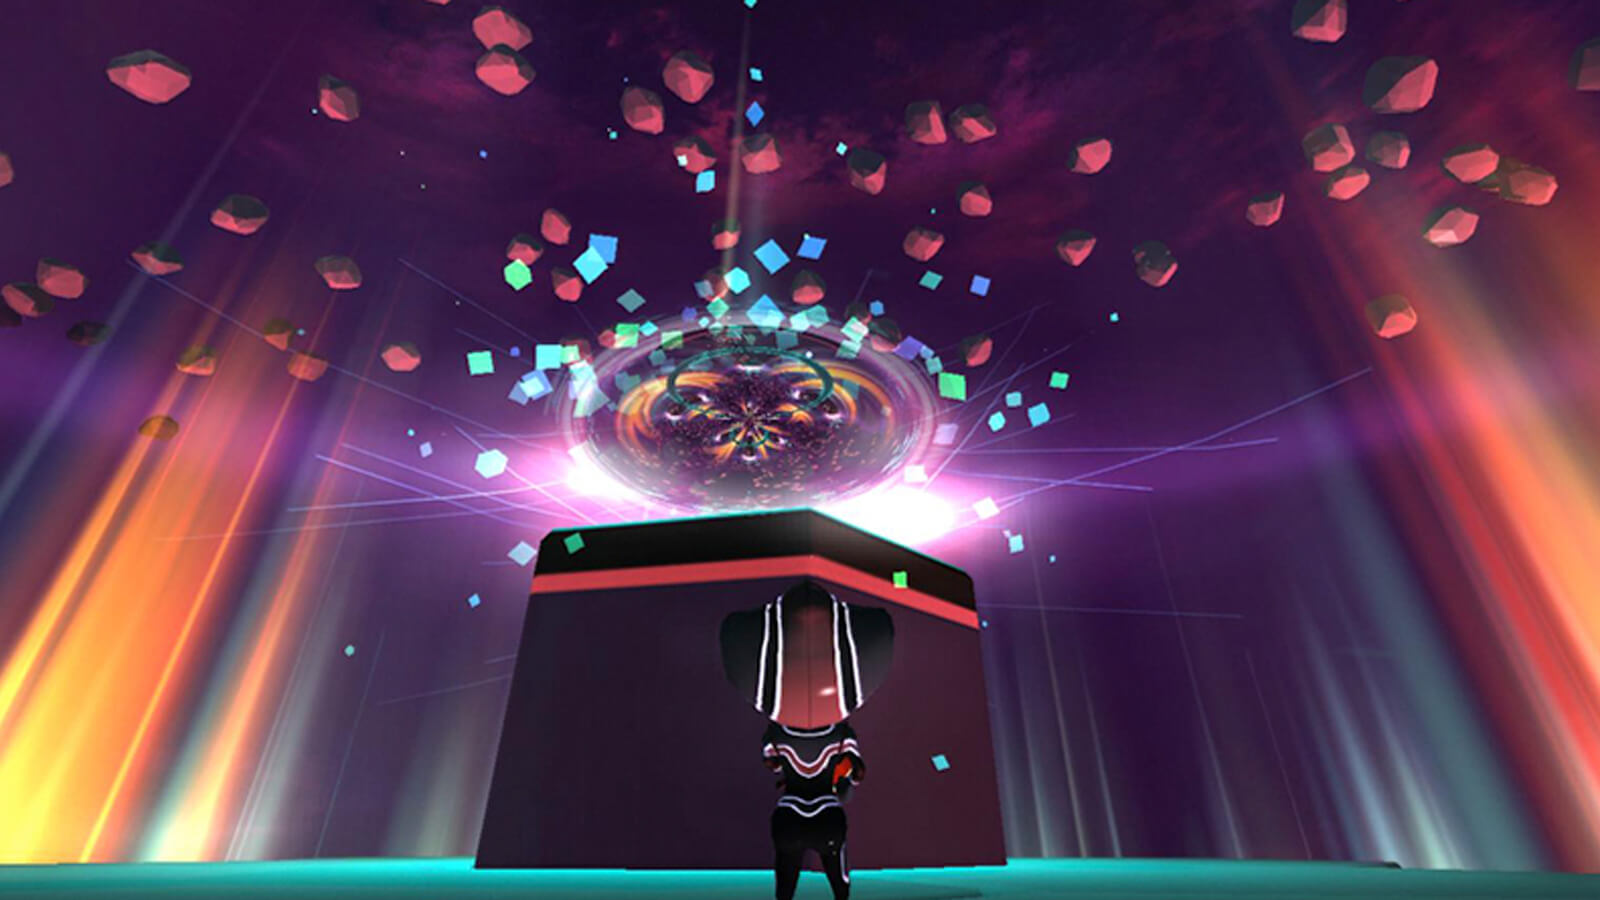 The player's character stares up at a raised platform as red, green, and blue blocks, rays, and particles swirl above